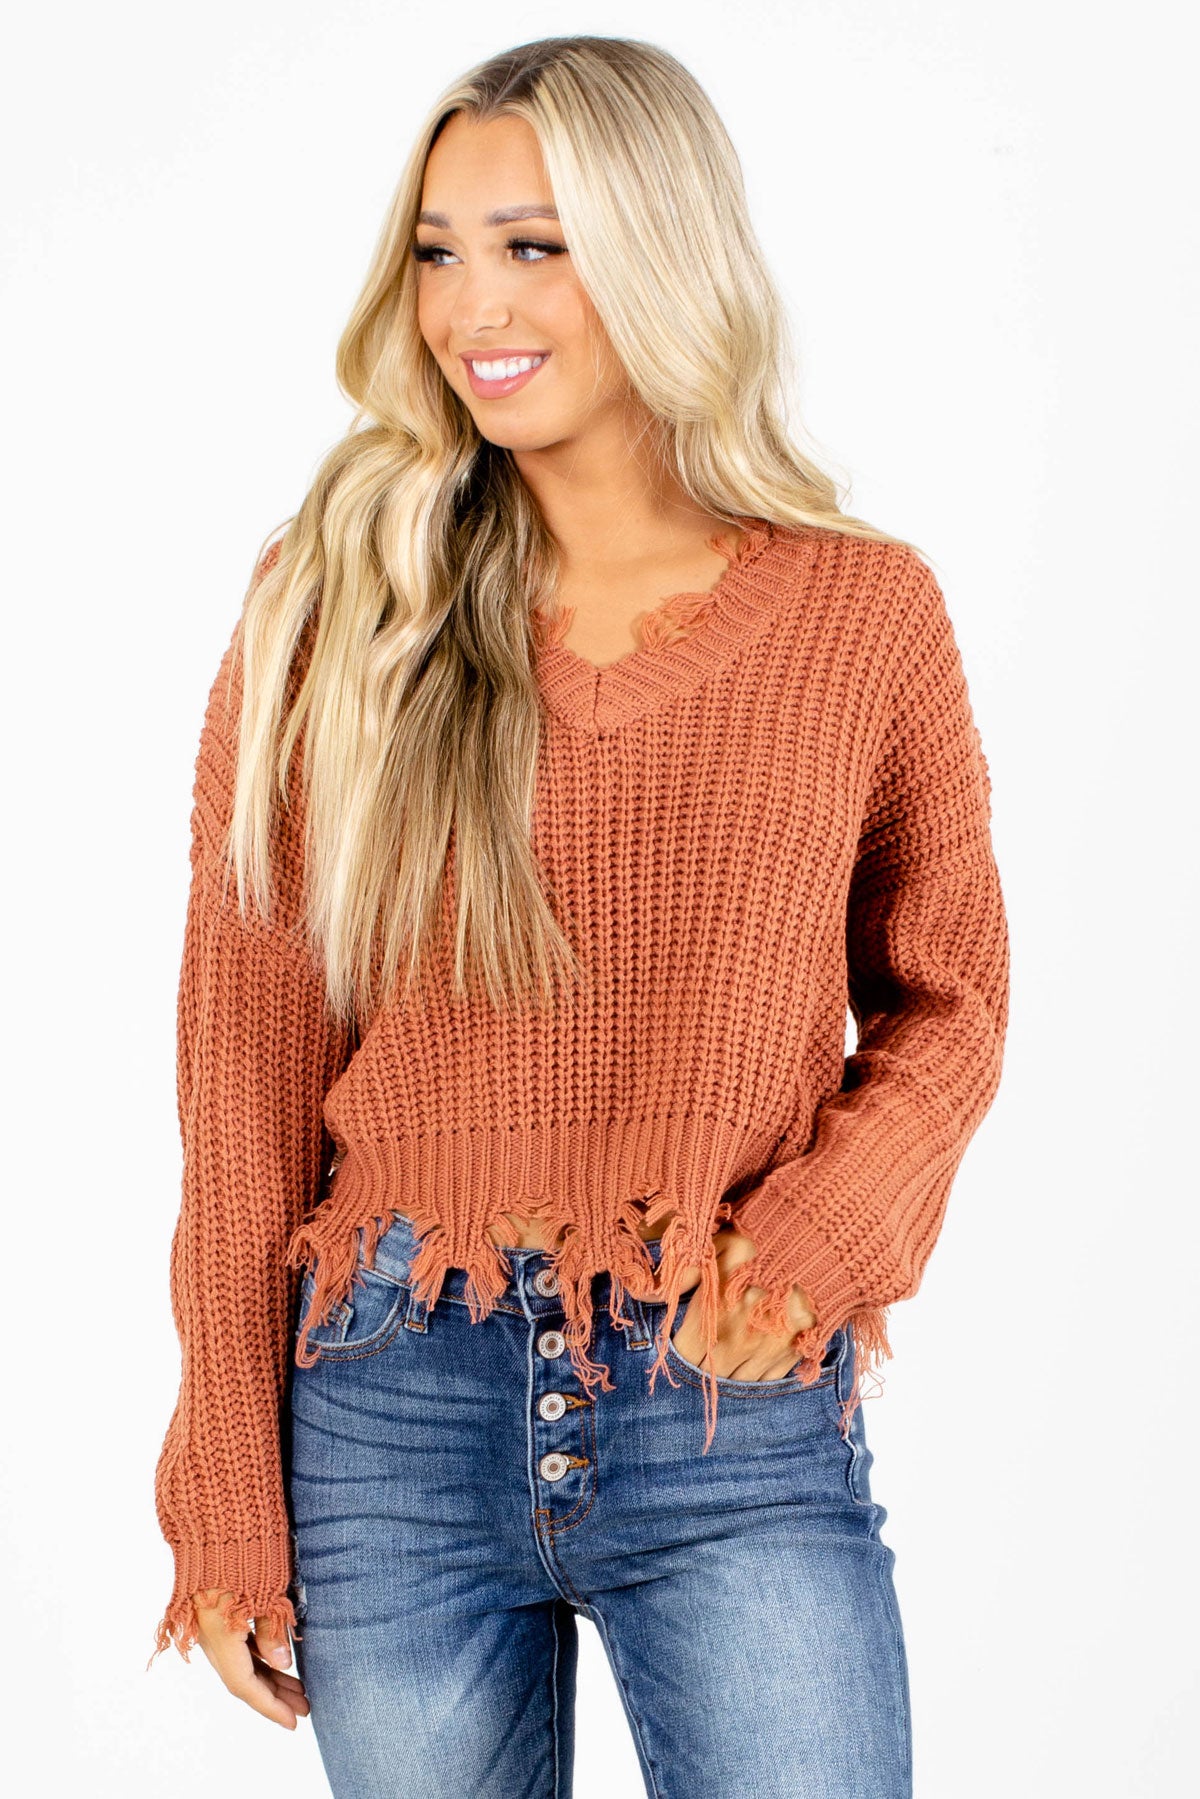 Salmon Distressed Detailed Boutique Sweaters for Women